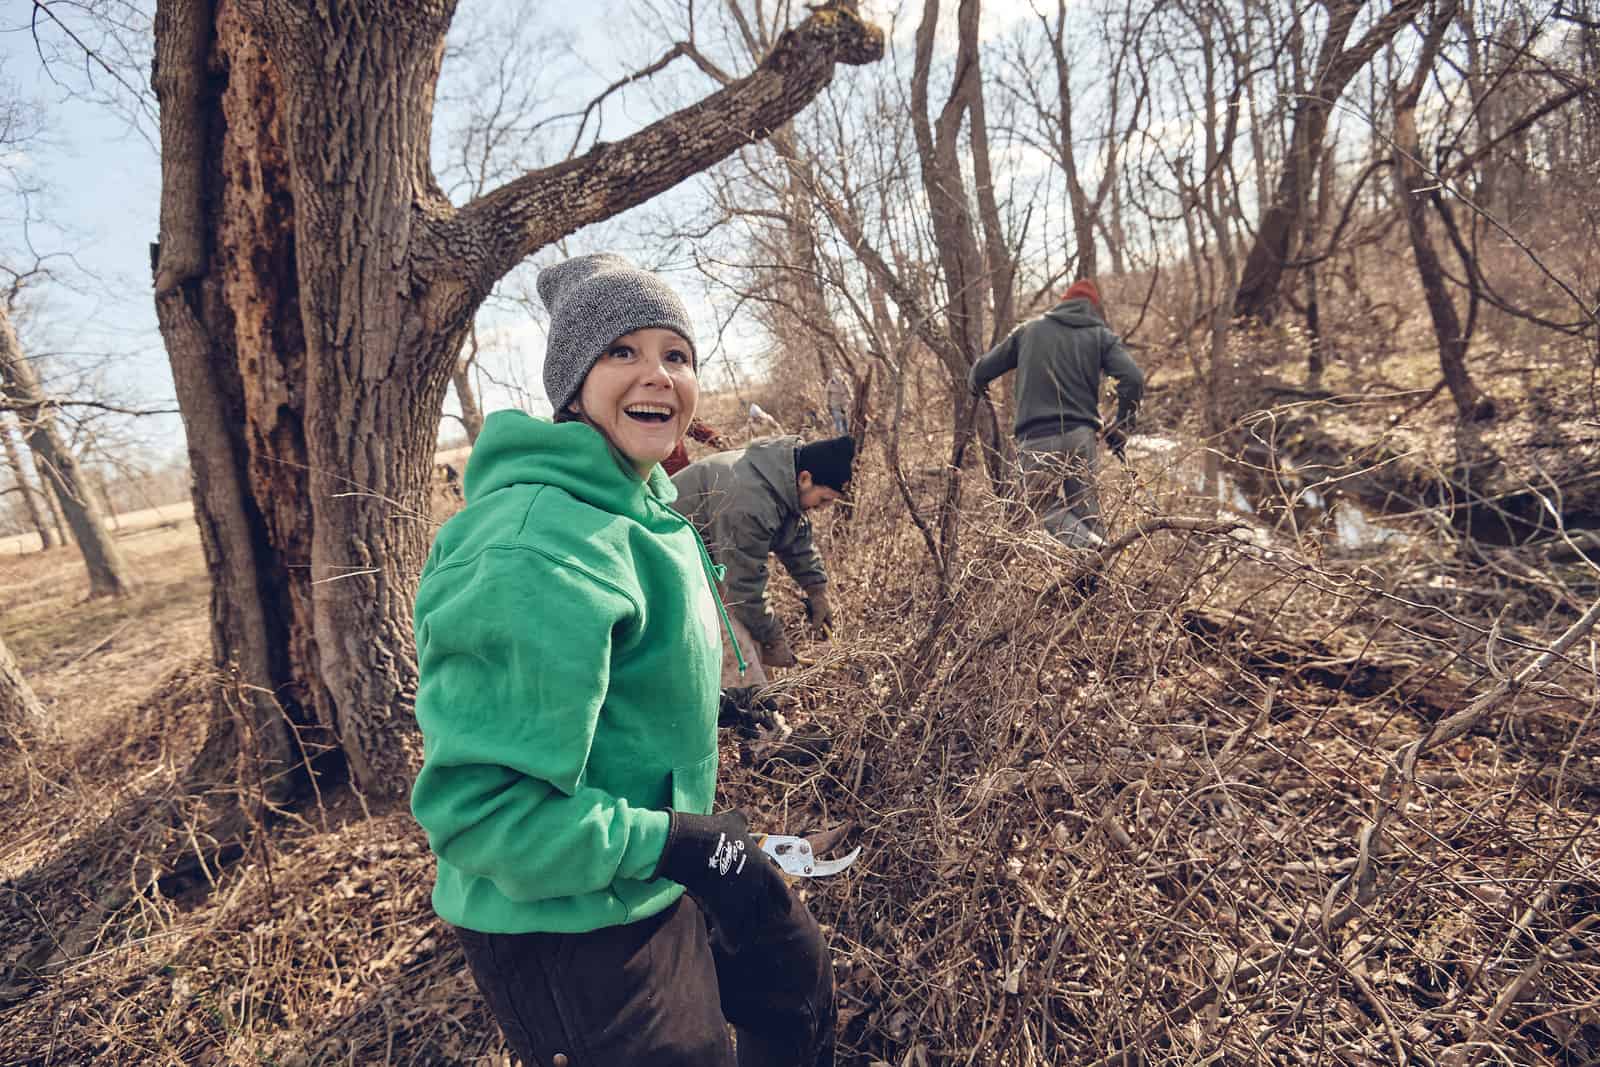 A person in a green hoodie and gray knit cap smiles at the camera while two other volunteers are in the background.